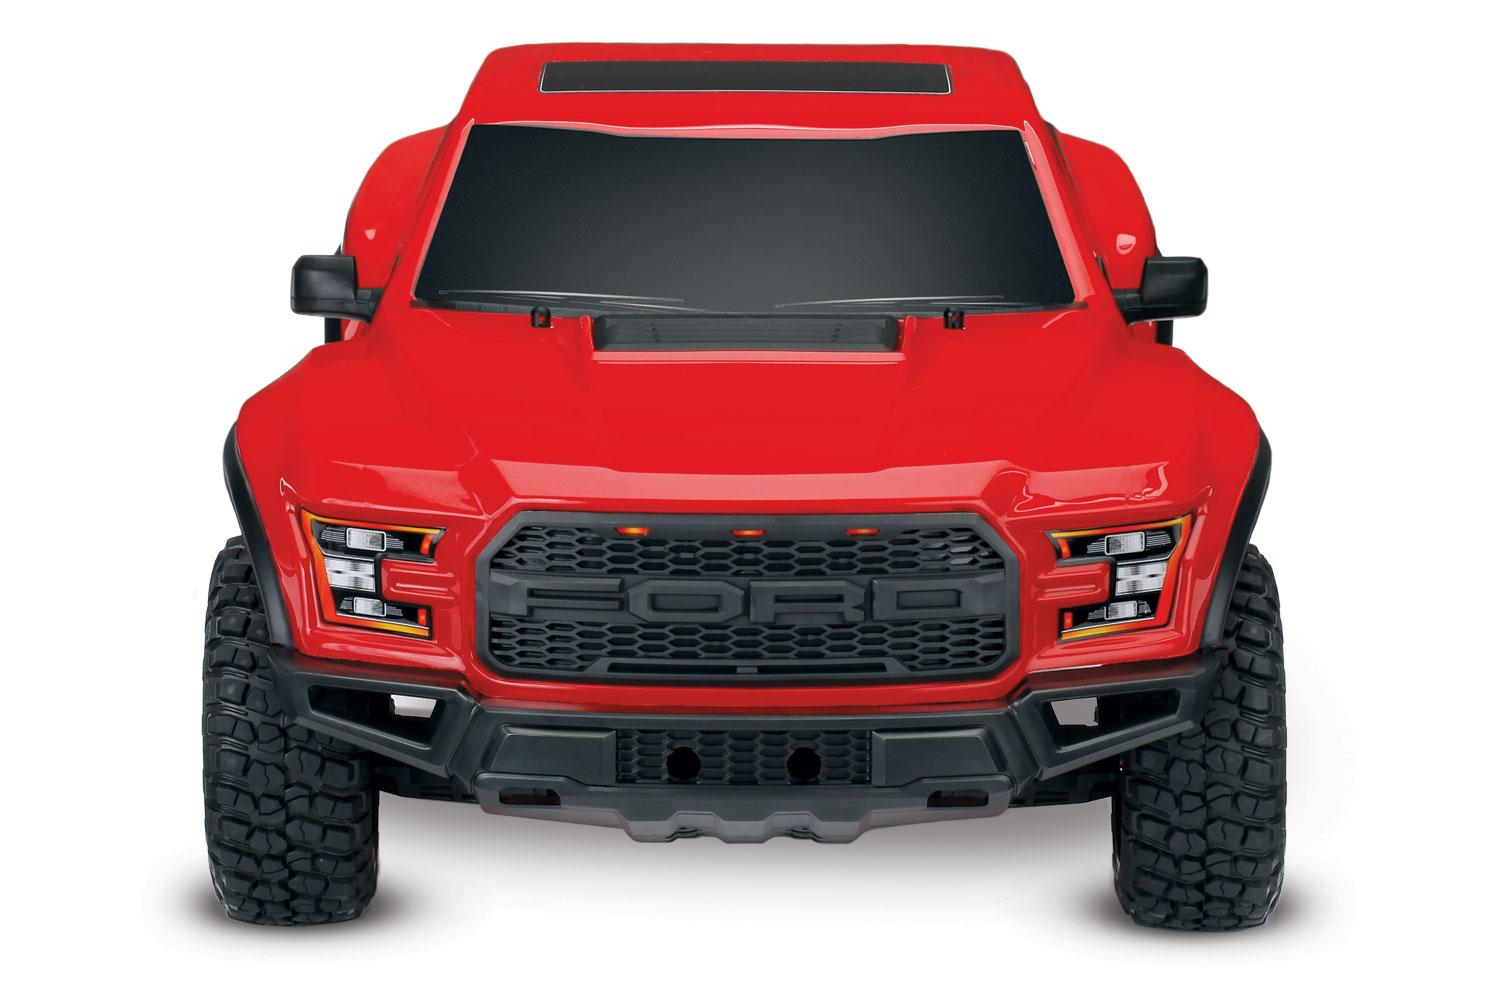 Rouge ID Traxxas Ford Raptor F-150-4X2-1/10 Brushed TQ 2.4GHZ 58094-1 